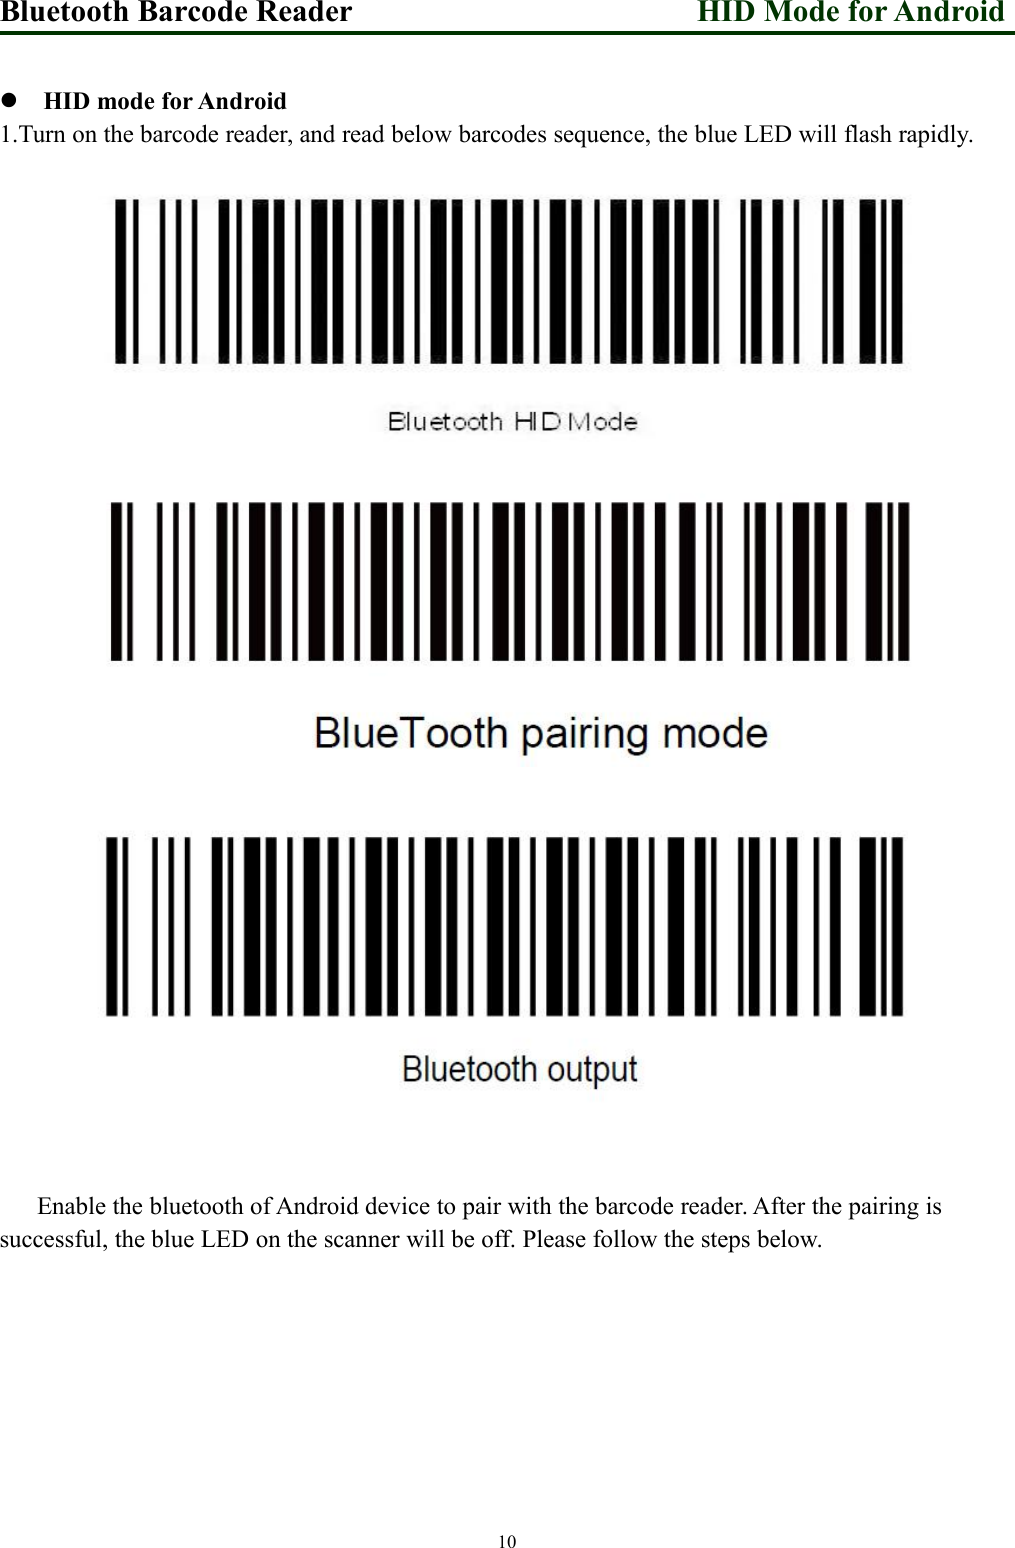 Bluetooth Barcode Reader HID Mode for Android10HID mode for Android1.Turn on the barcode reader, and read below barcodes sequence, the blue LED will flash rapidly.Enable the bluetooth of Android device to pair with the barcode reader. After the pairing issuccessful, the blue LED on the scanner will be off. Please follow the steps below.